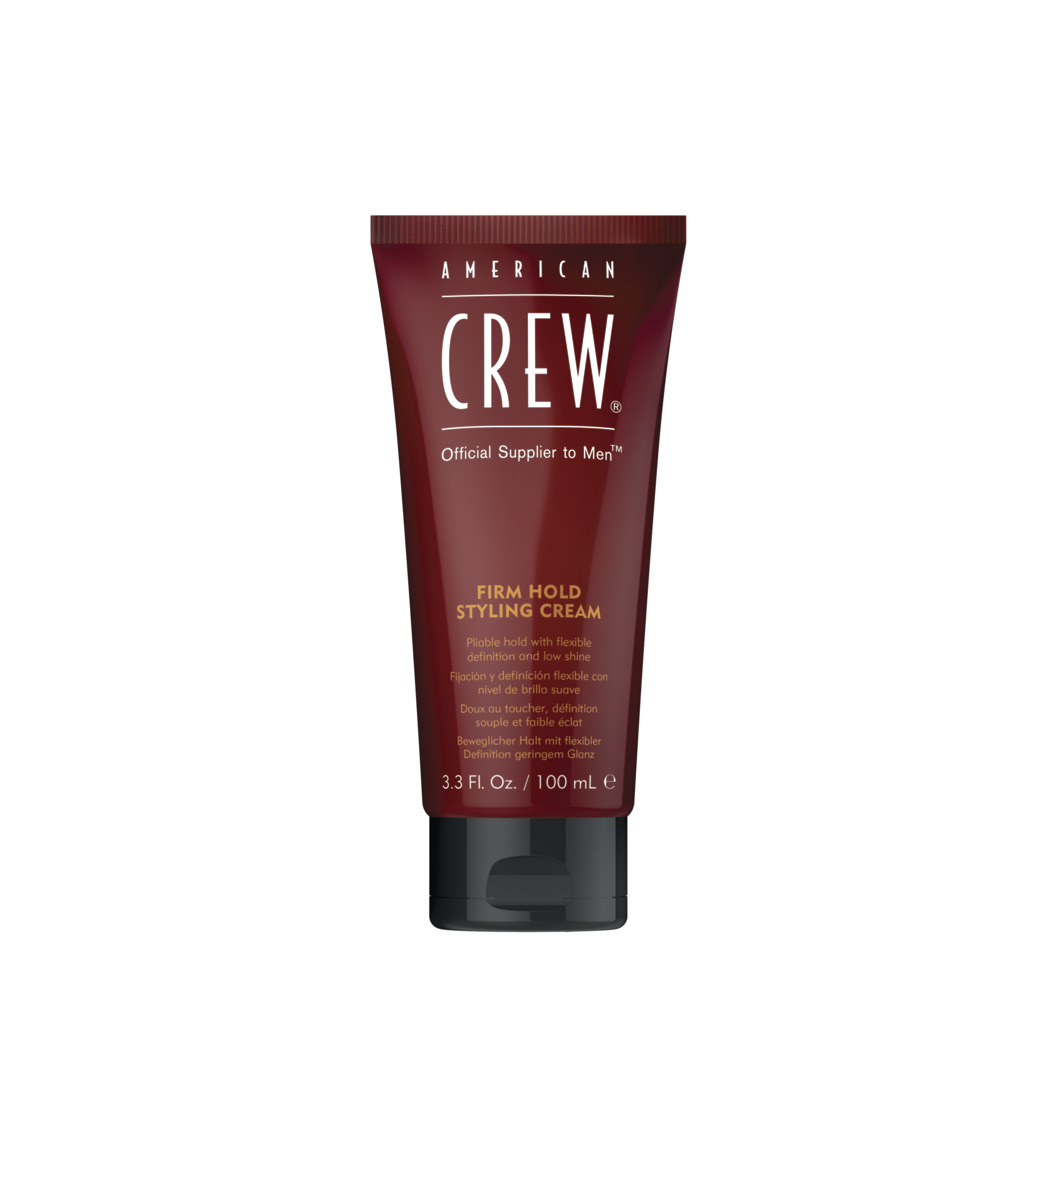  Firm Hold Styling Cream